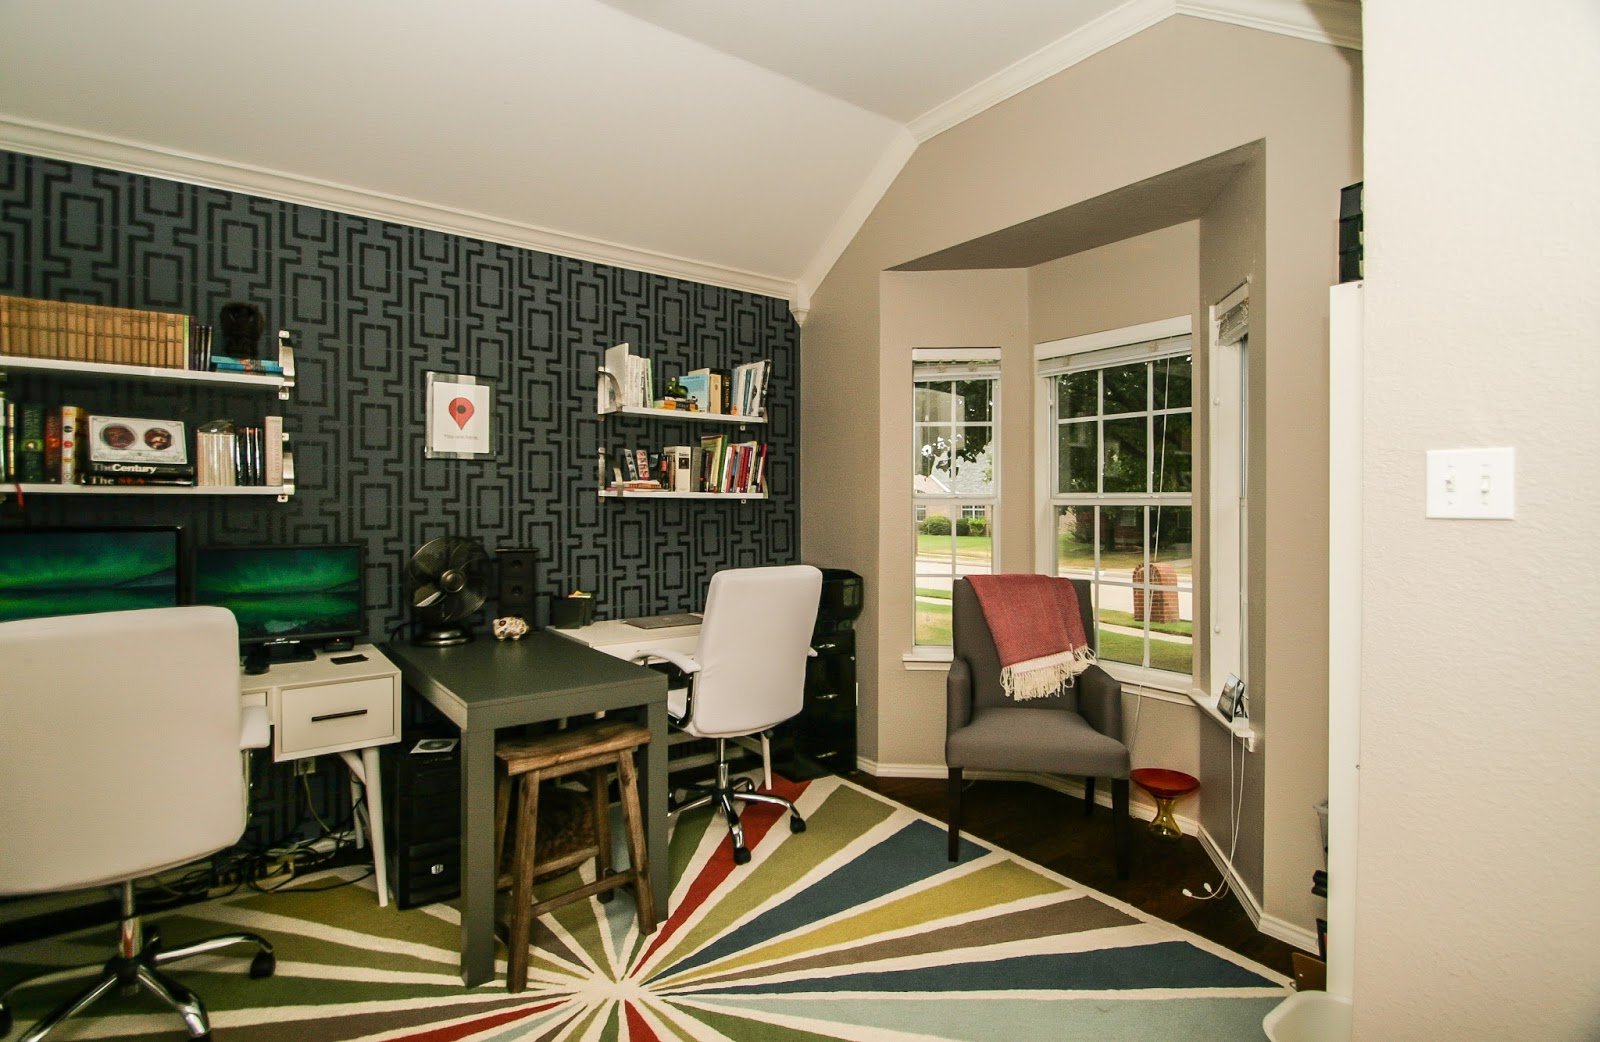 A DIY stenciled accent wall in a home office using the Connection Allover Stencil. http://www.cuttingedgestencils.com/wallpaper-stencil-connection.html